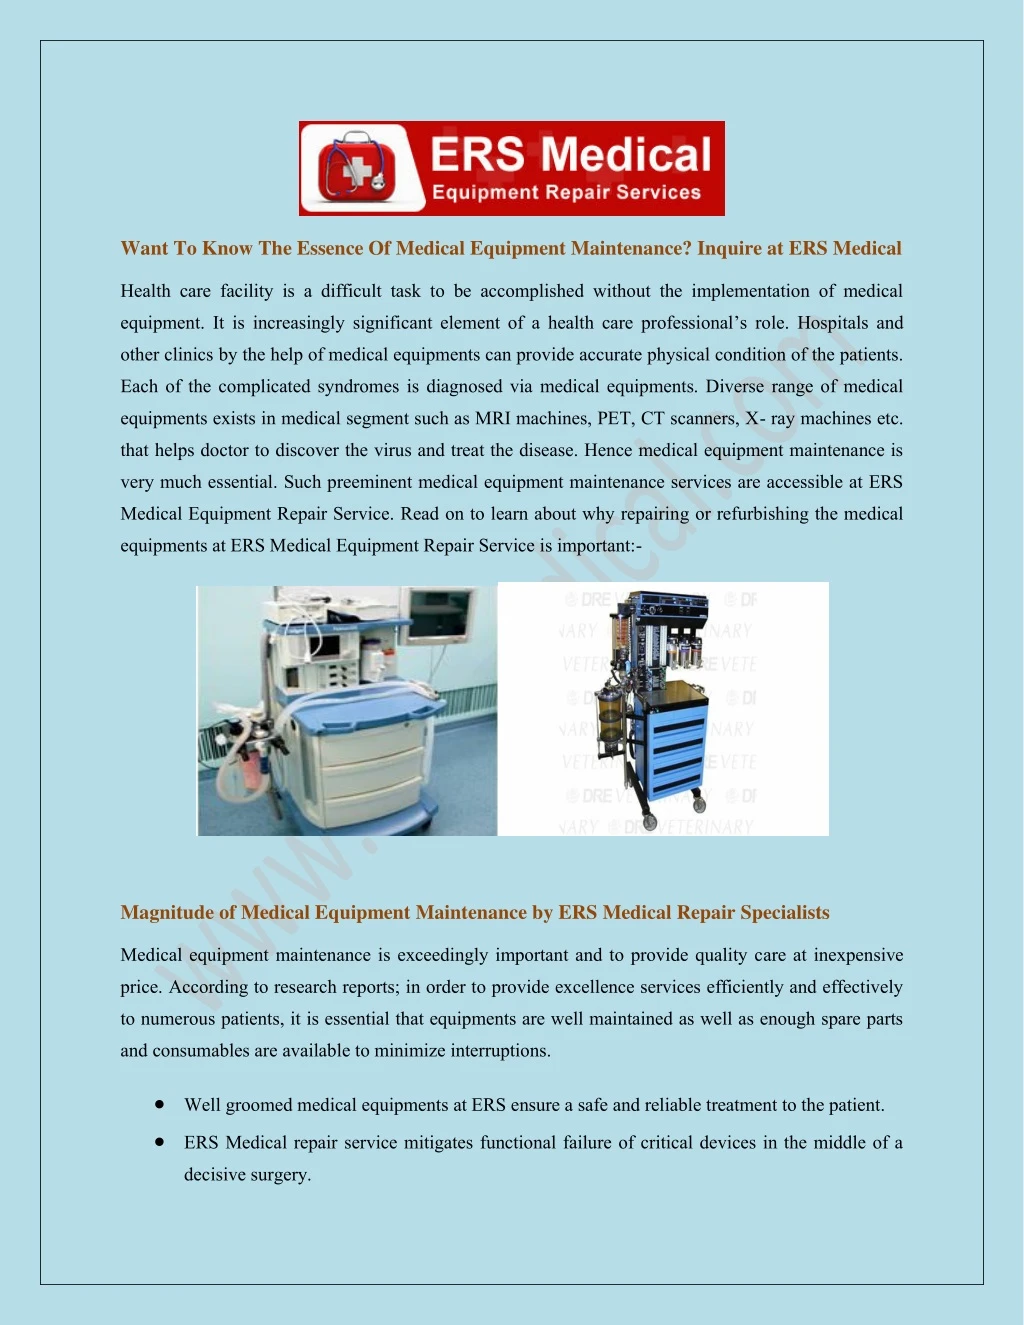 want to know the essence of medical equipment